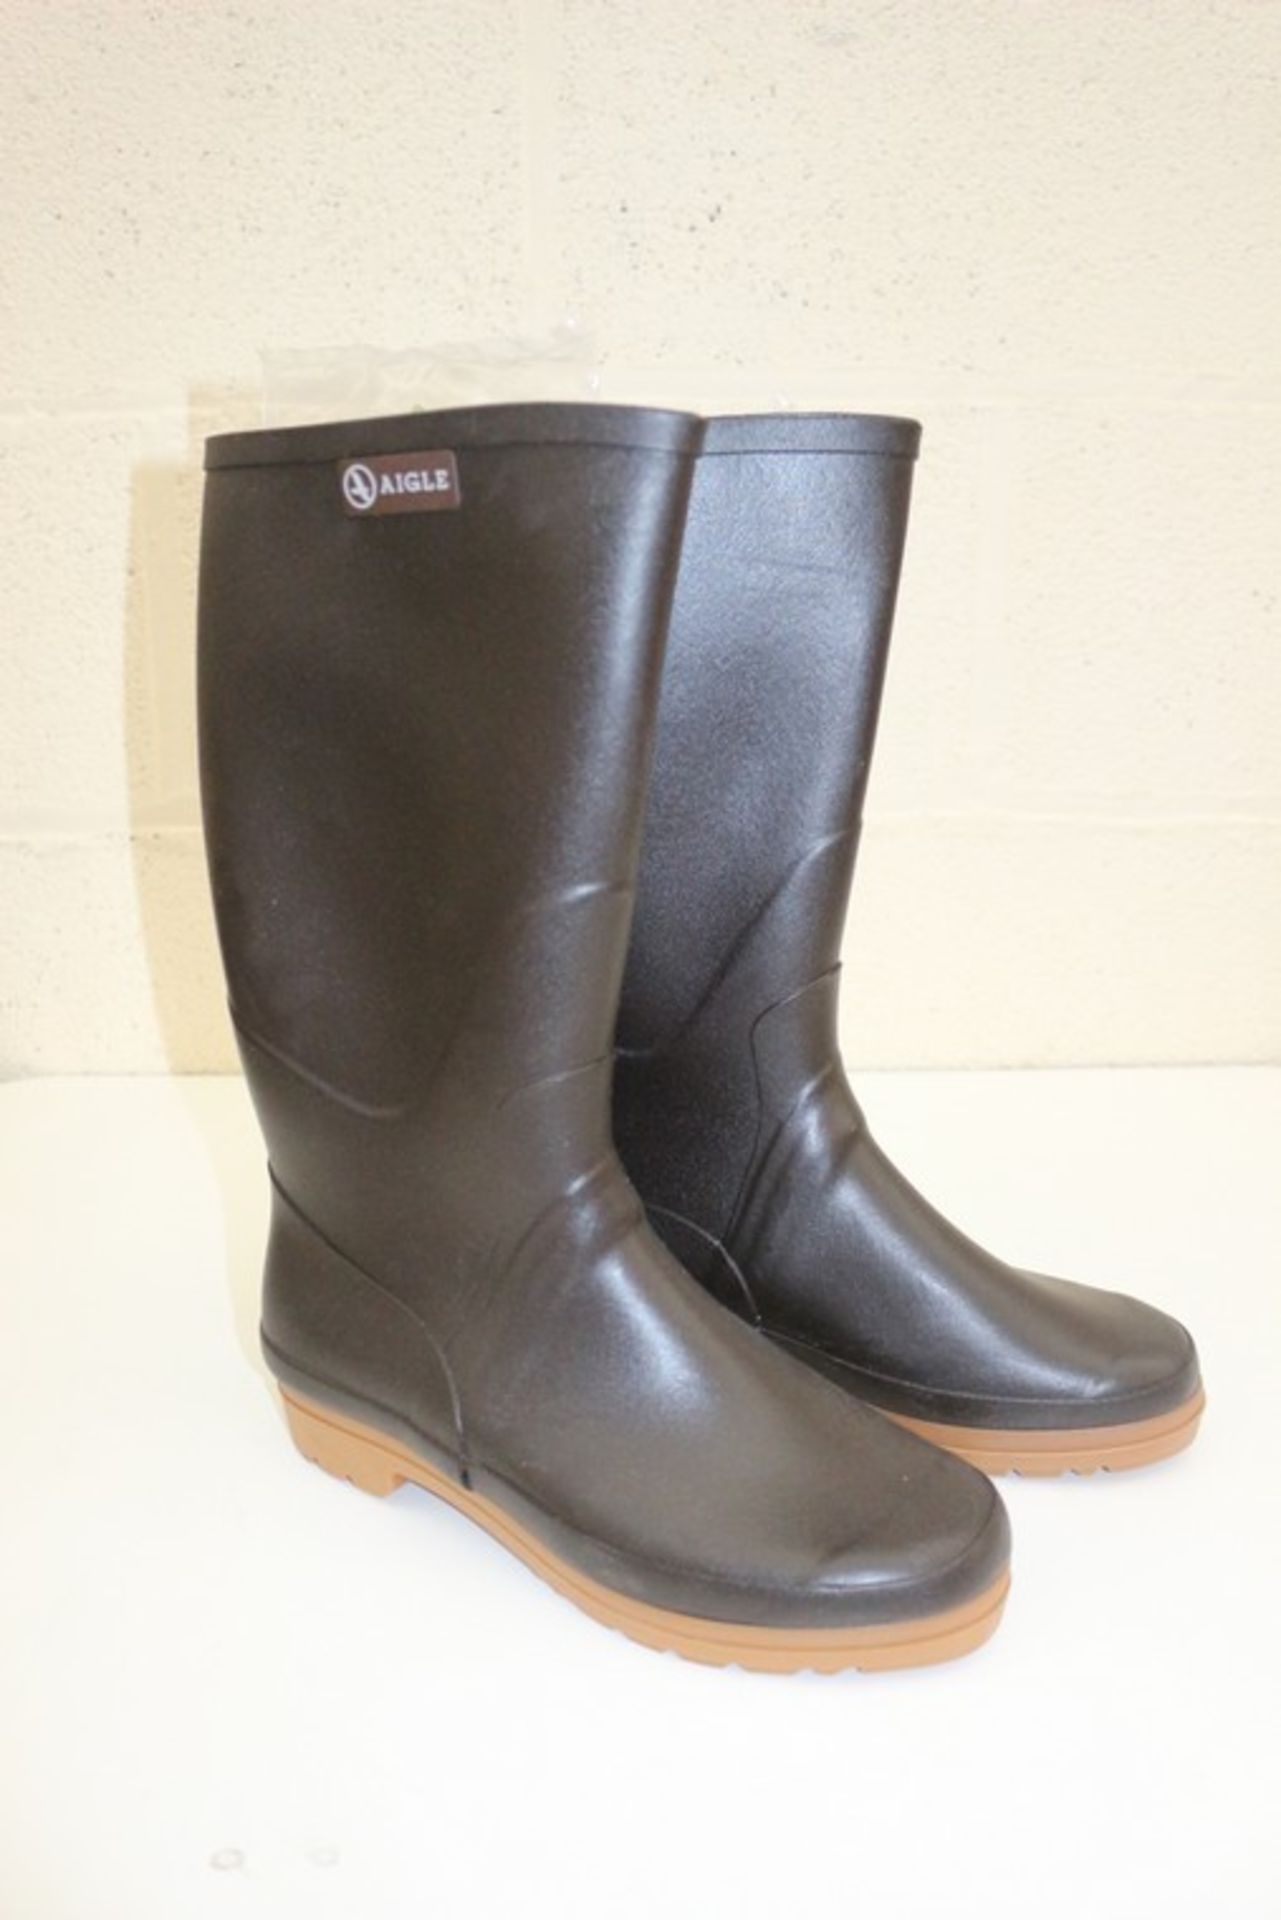 1 x BRAND NEW PAIR OF AIGLE PARCOUR GENTS DESIGNER WELLINGTON BOOTS RRP £150 *PLEASE NOTE THAT THE